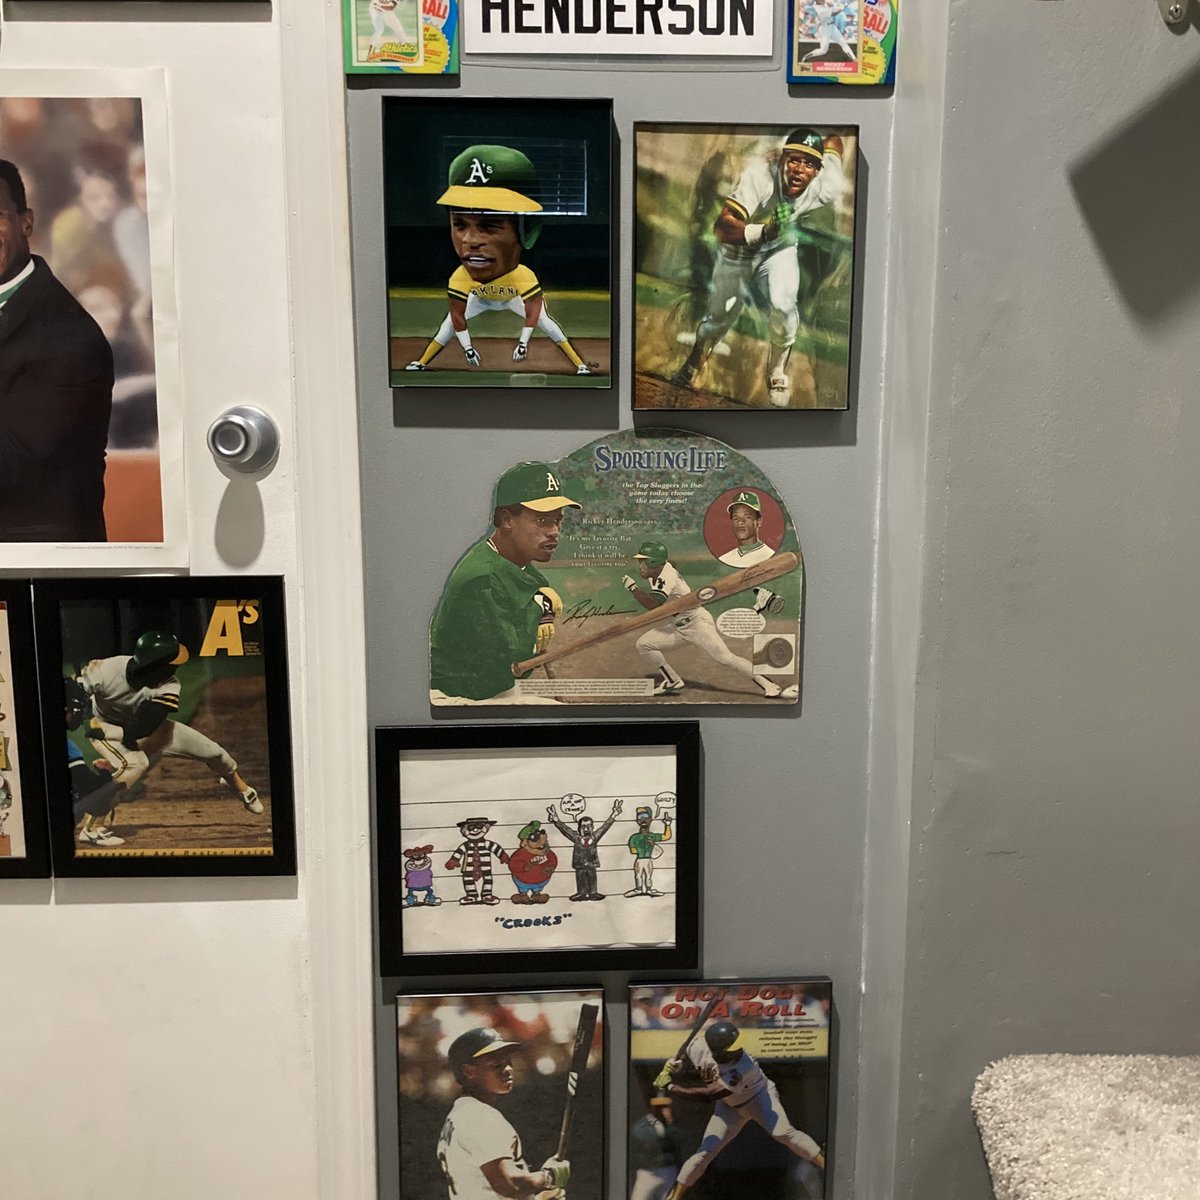 Todays Rickey Henderson PC swag is this amazing vintage fresh art piece from Sporting Life! Made to resemble a 1920’s counter top store display ad, I love the details and shape of this 14x11 handmade unique item! So fun…@CardPurchaser 🔥💚👀🐐⚾️🏃🏿💨🧤#rickeyhenderson #thehobby